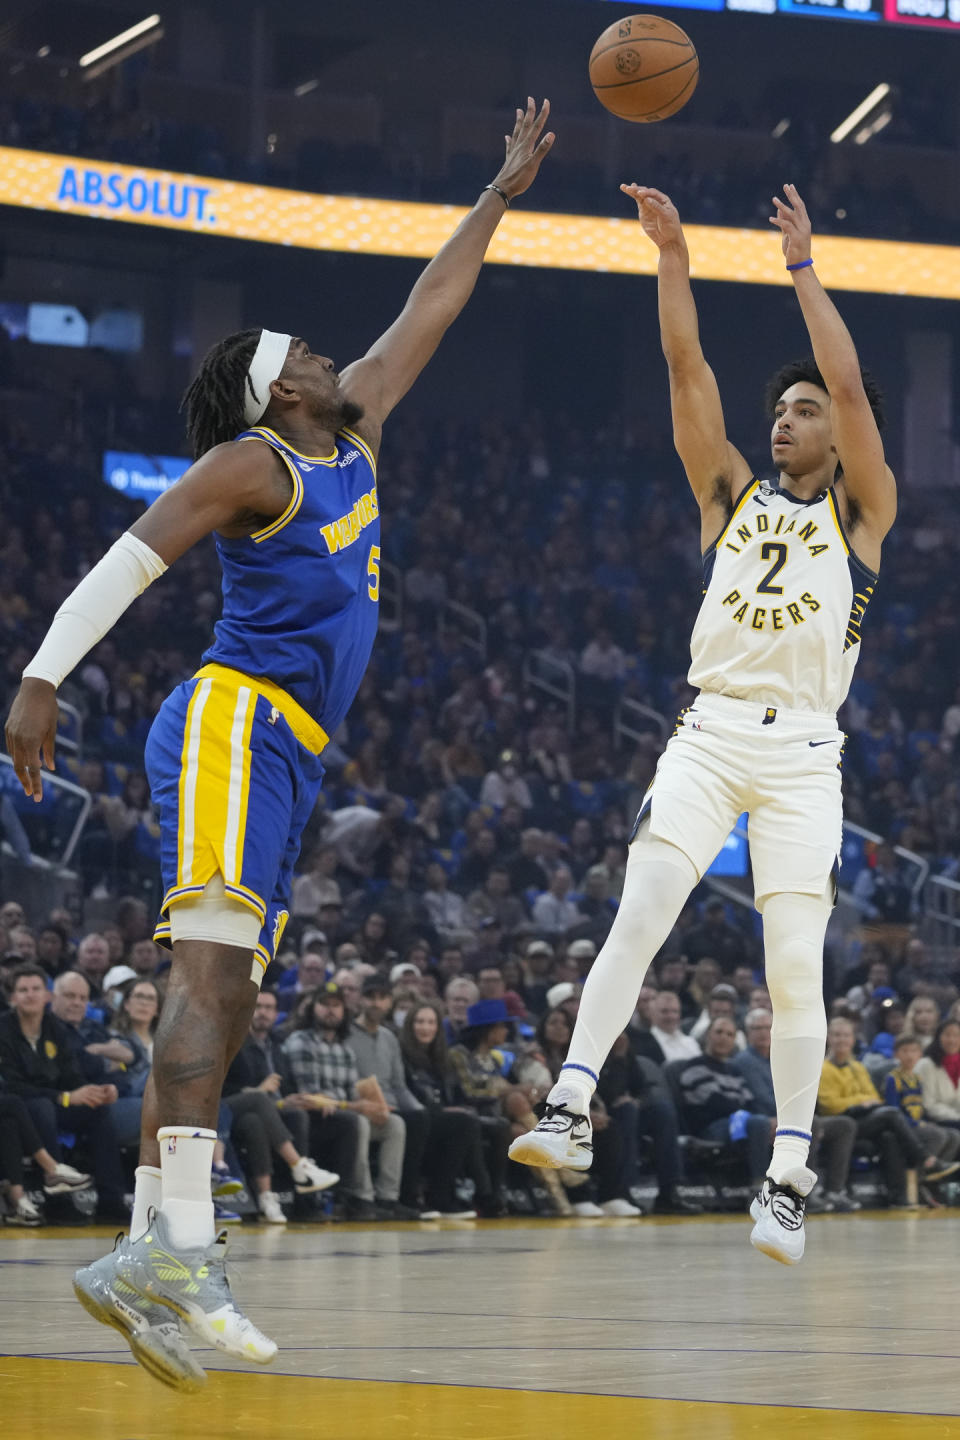 Indiana Pacers guard Andrew Nembhard (2) shoots over Golden State Warriors center Kevon Looney during the first half of an NBA basketball game in San Francisco, Monday, Dec. 5, 2022. (AP Photo/Godofredo A. Vásquez)